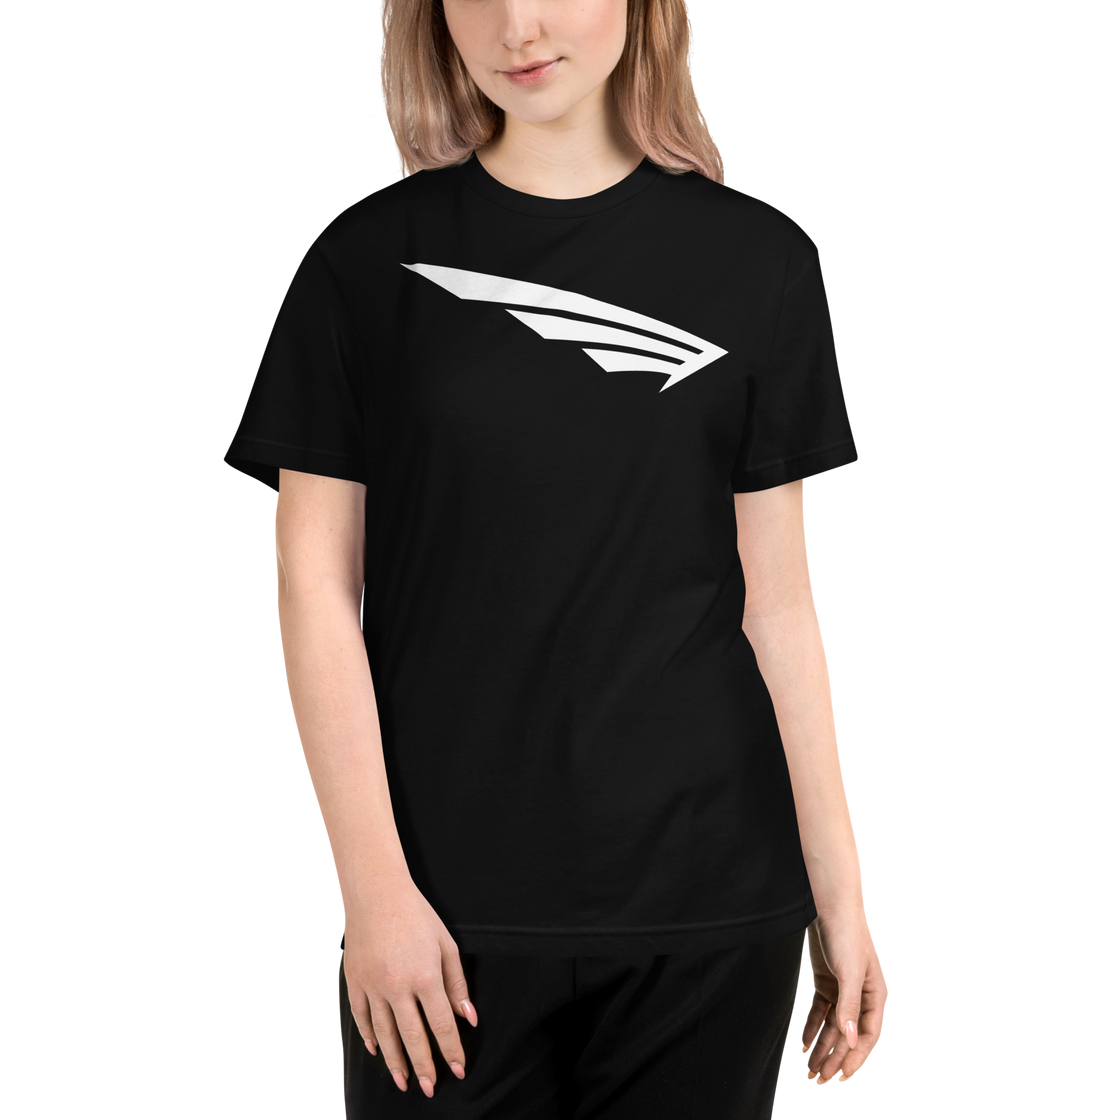 FLY³ Sustainable T-Shirt | Flycube